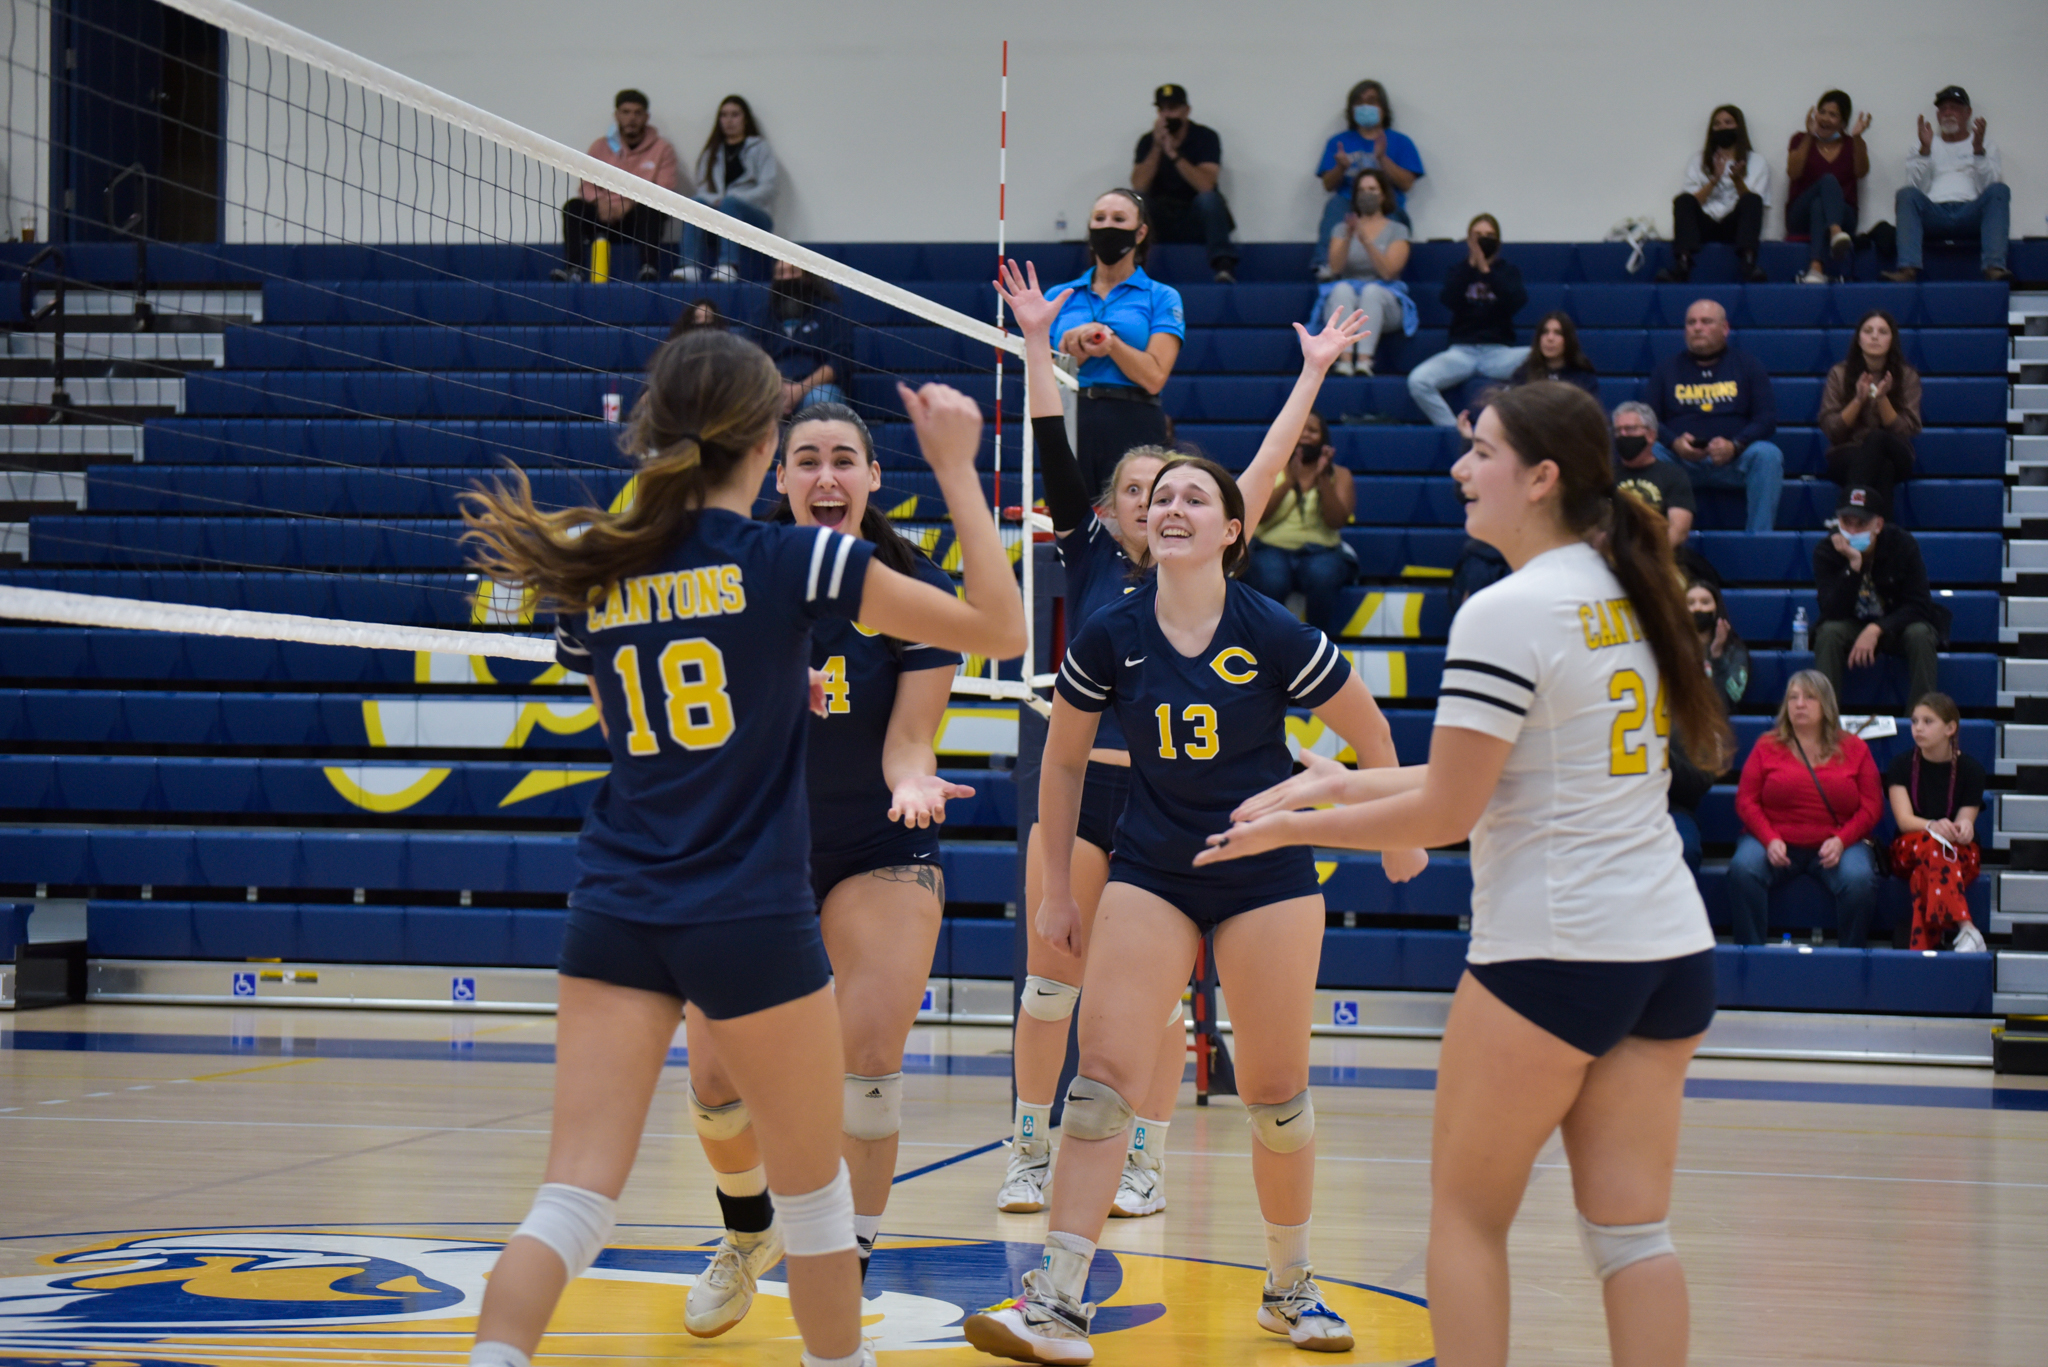 College of the Canyons women's volleyball vs. Mt. JAC on Nov. 20, 2021.